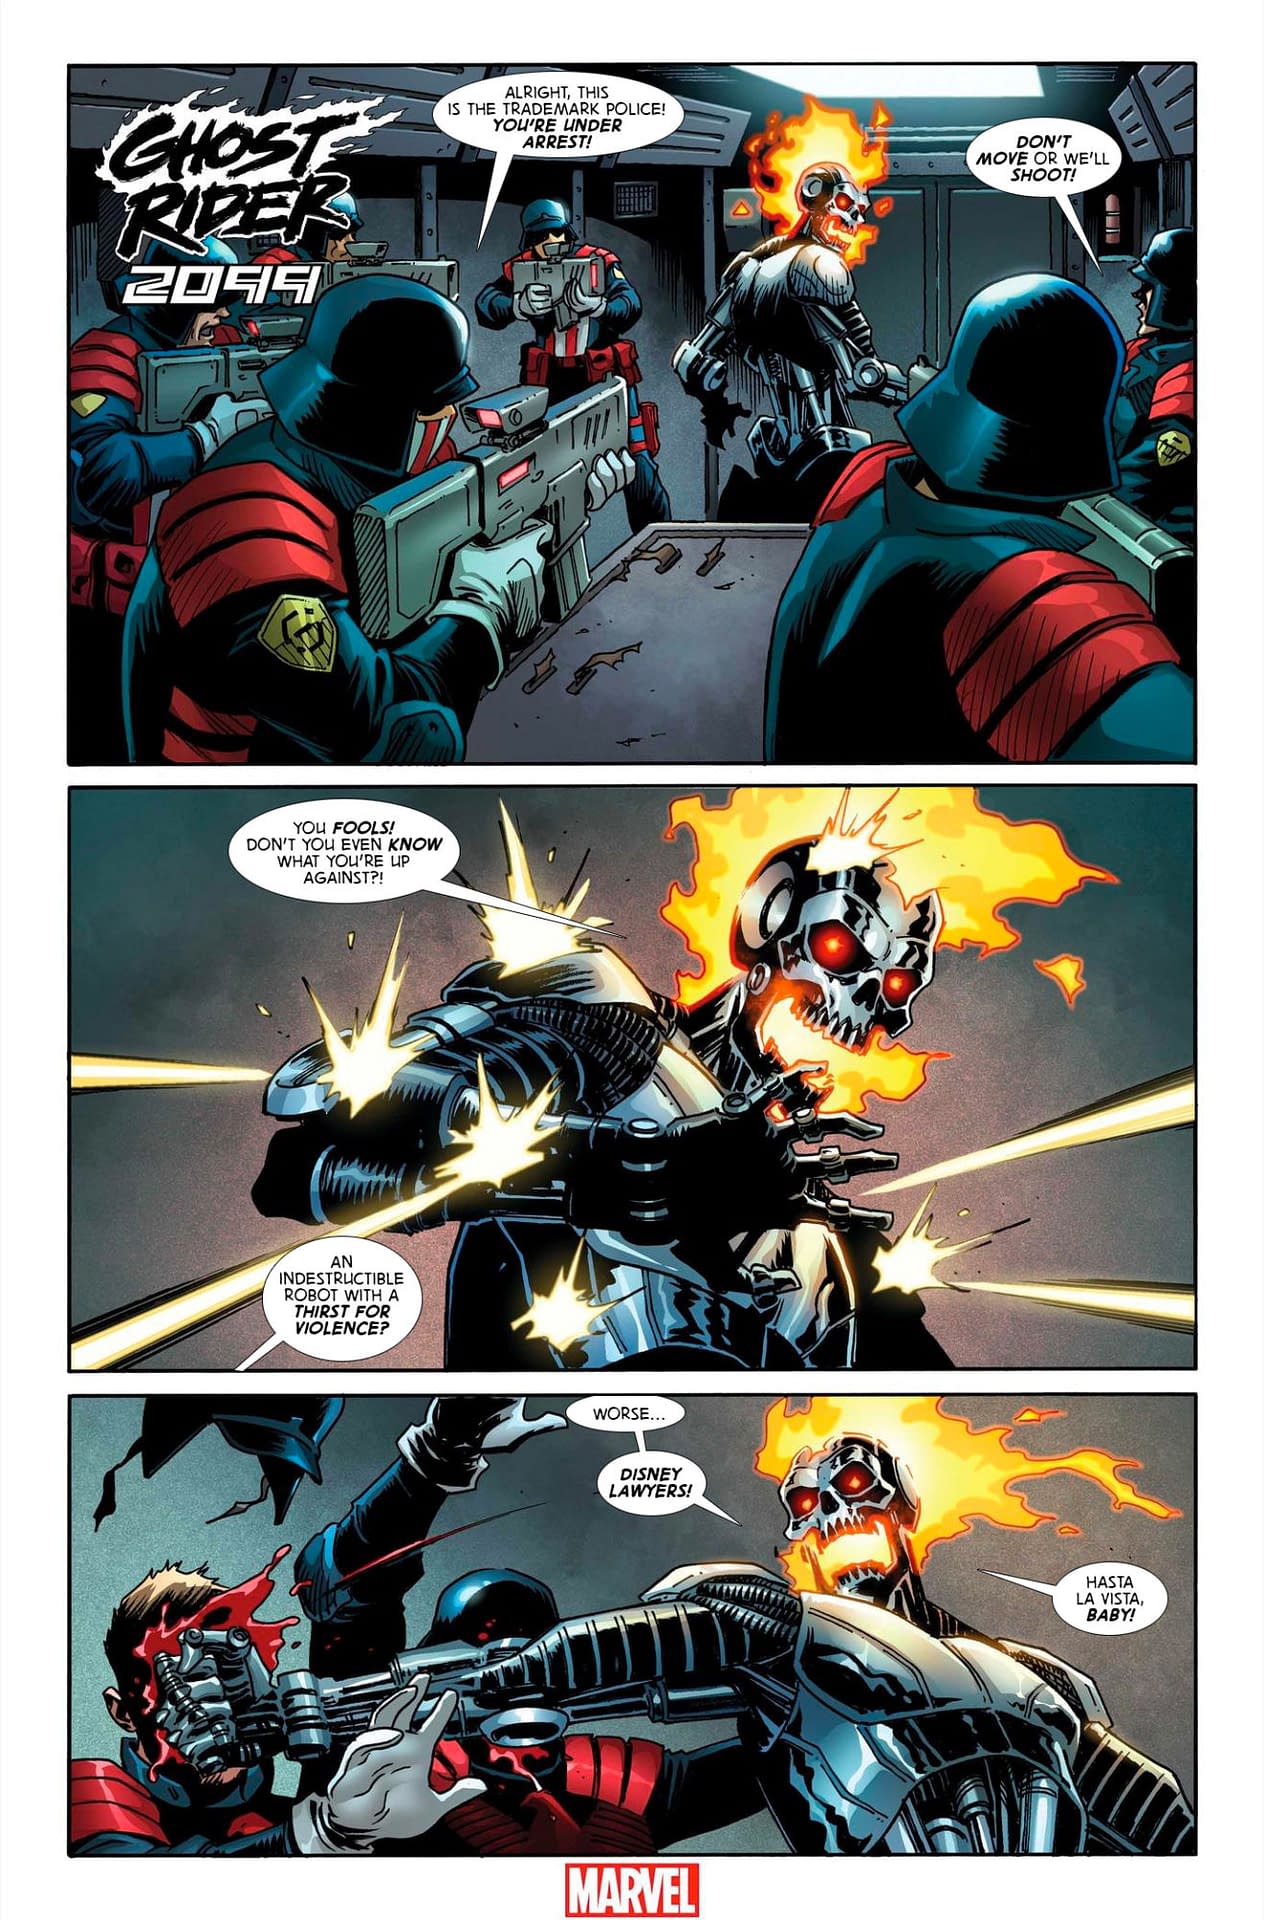 Improbable Previews: A Dark Fate for Ghost Rider 2099